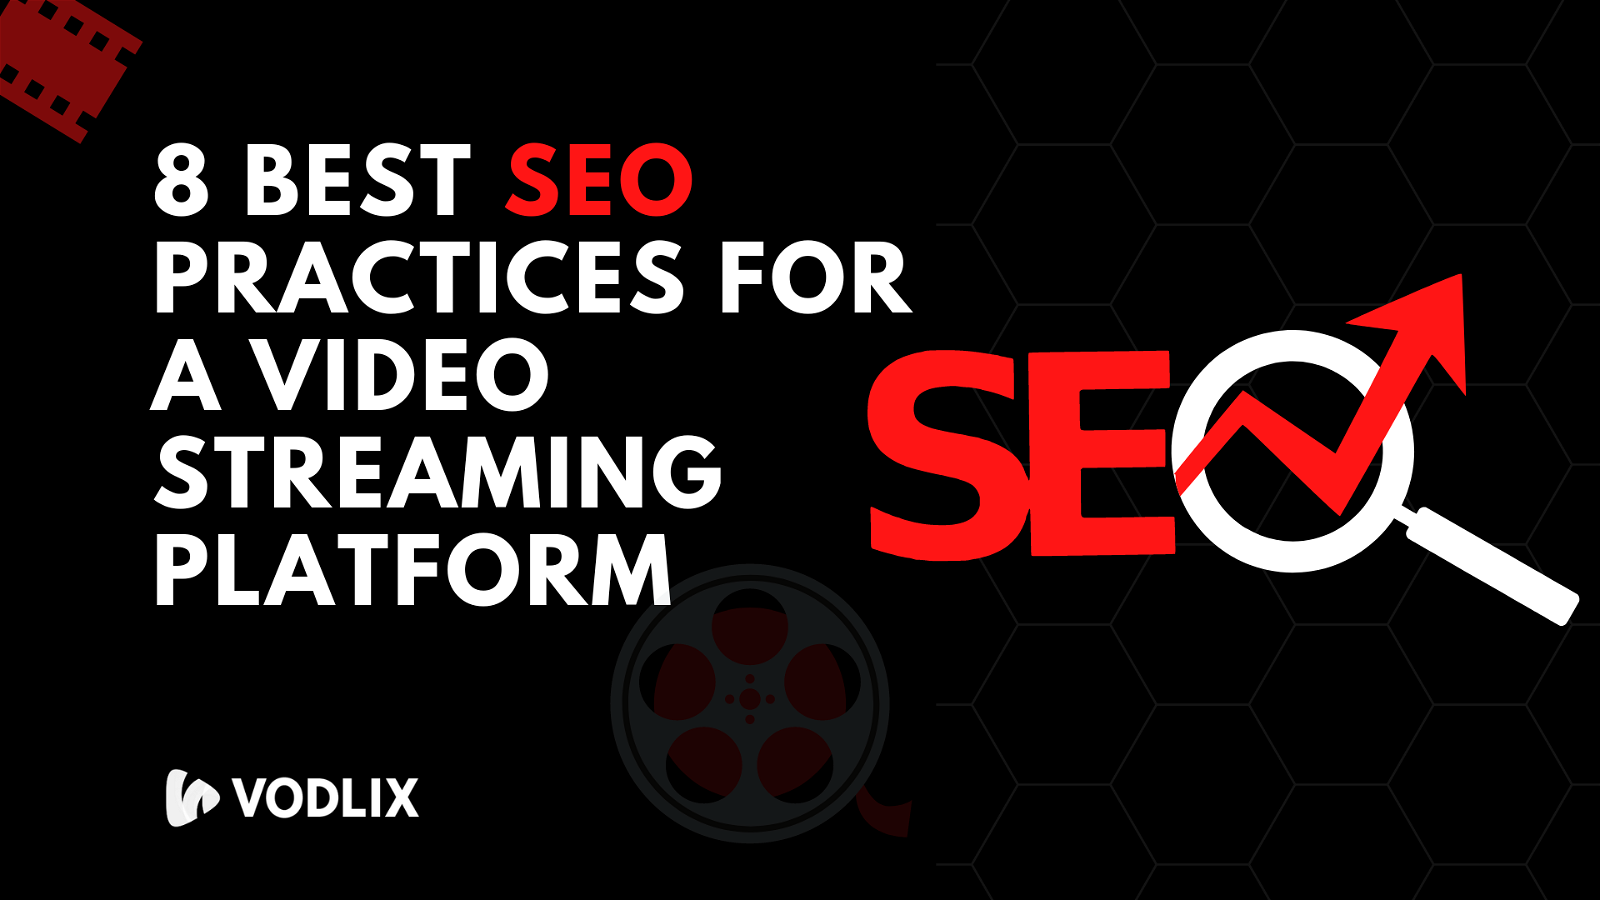 8 Best SEO practices for a video streaming platform